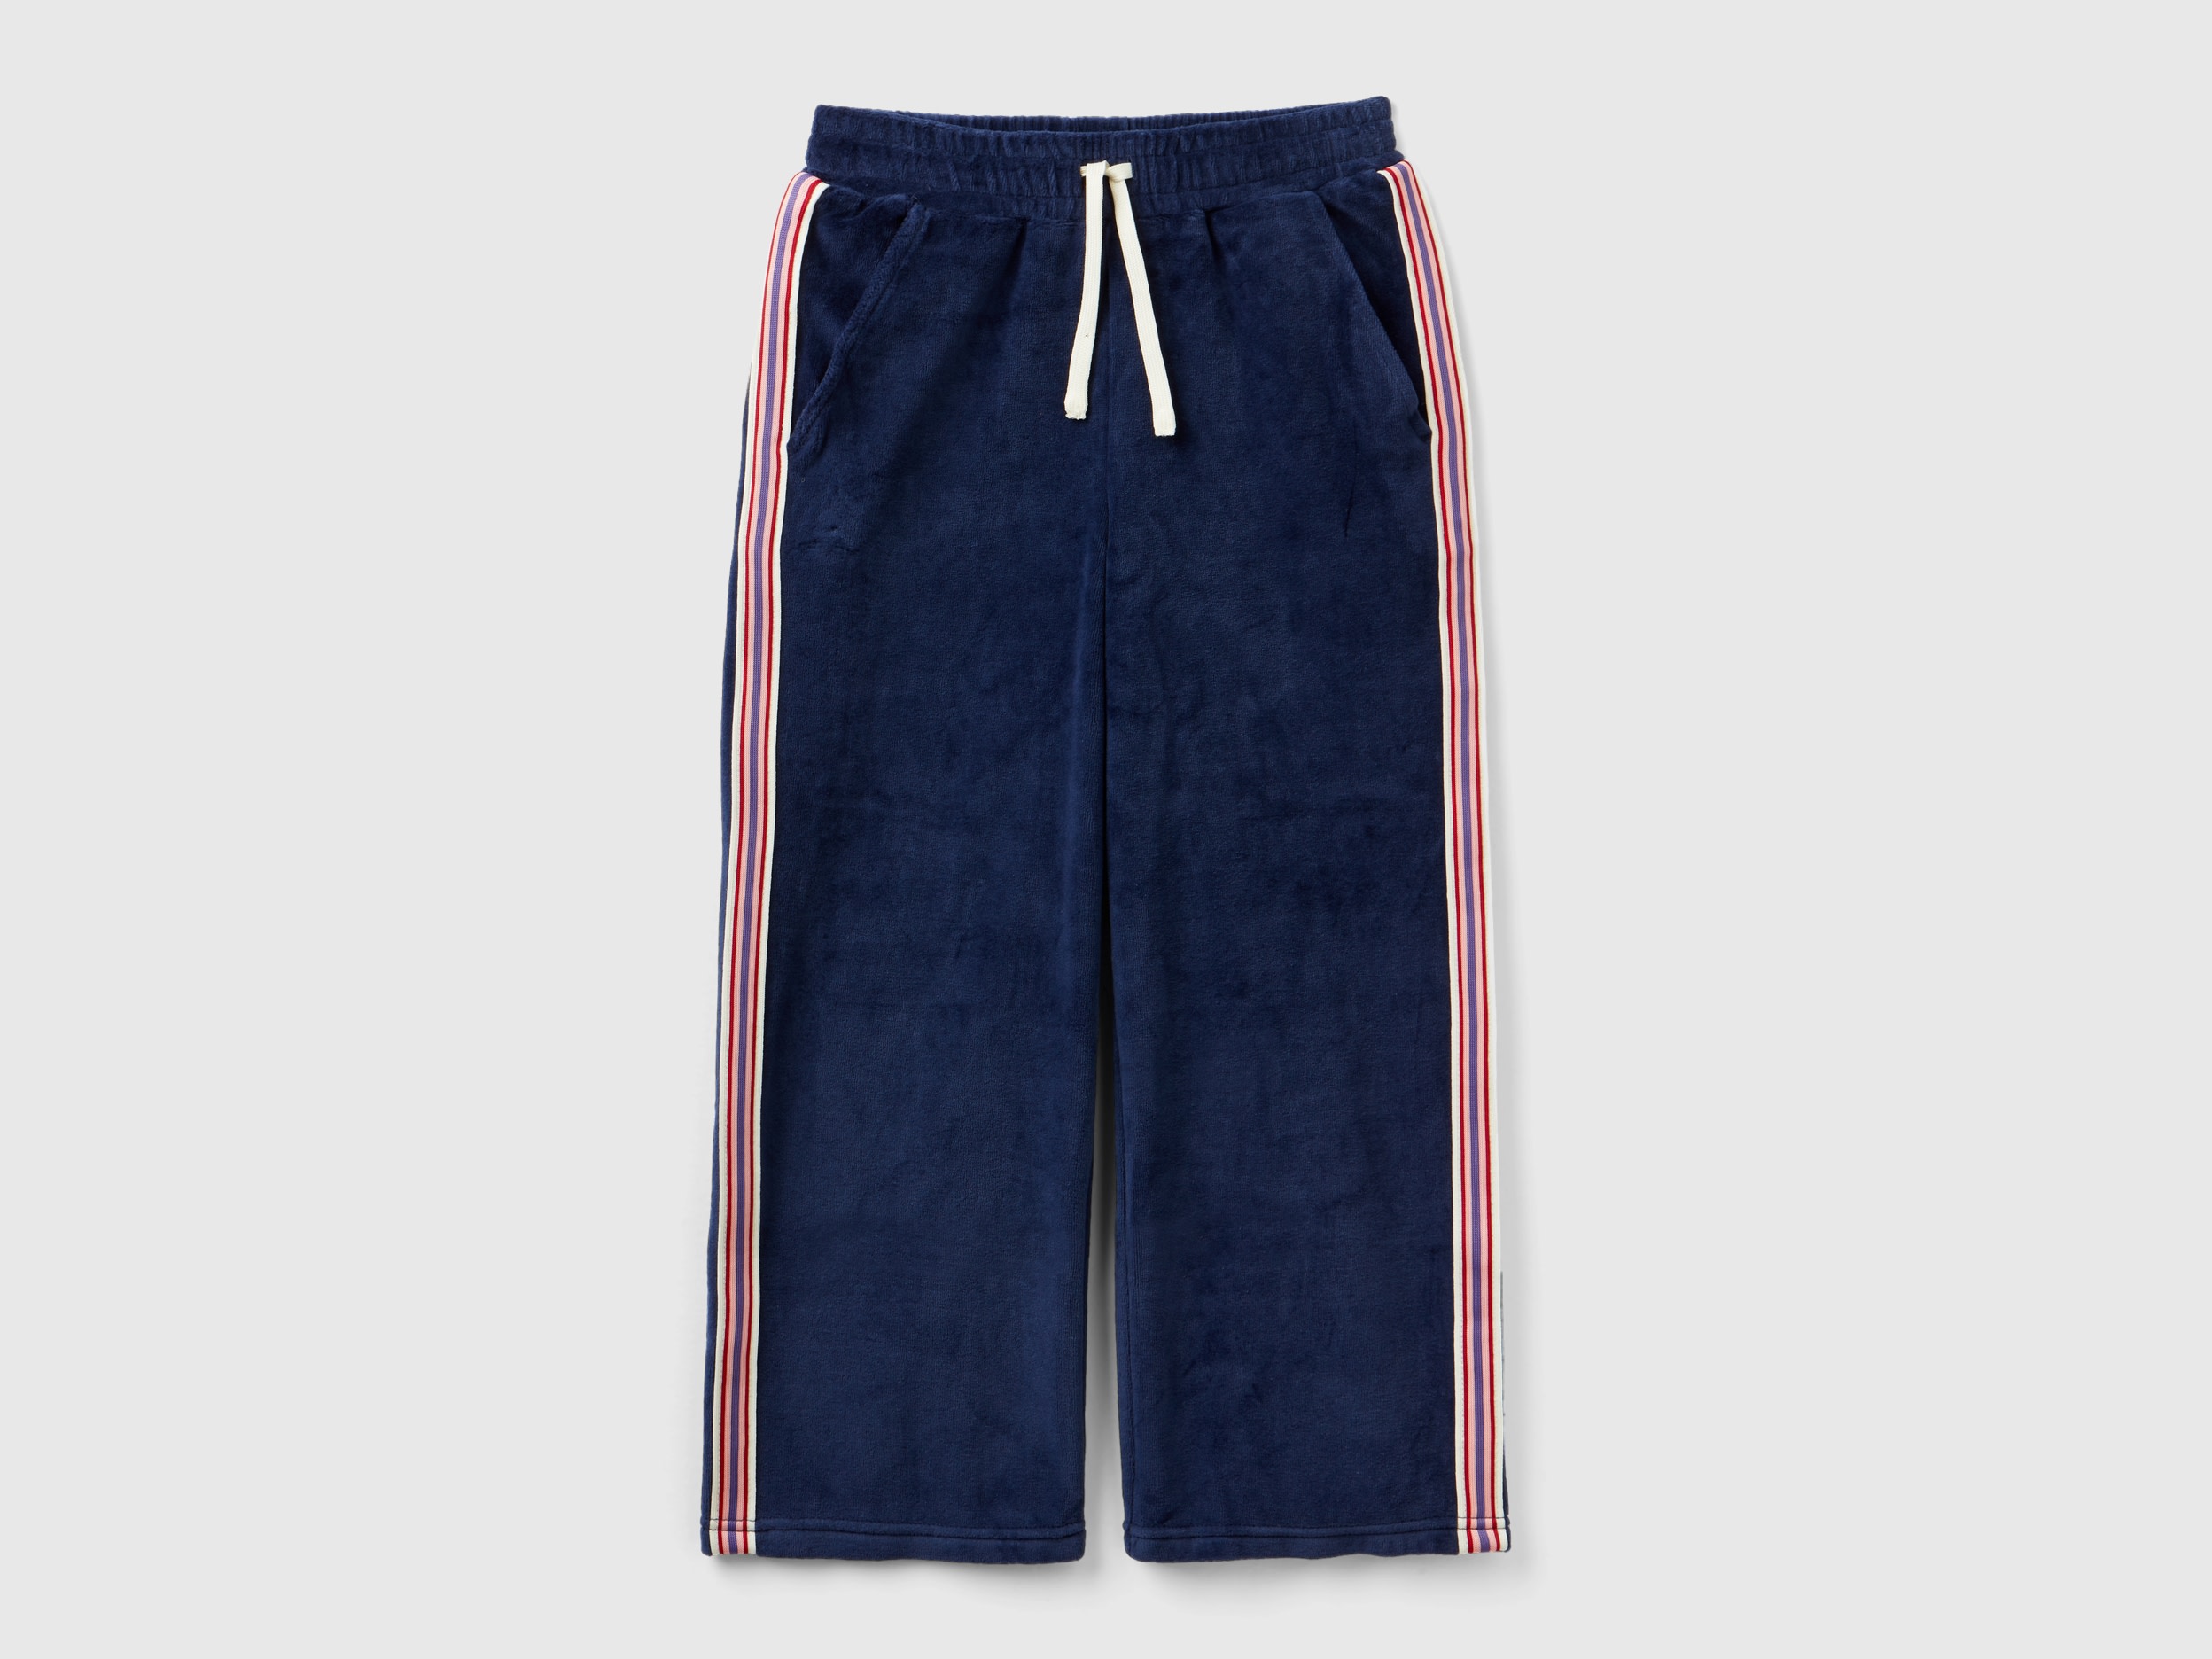 Benetton, Chenille Trousers With Striped Bands, size M, Dark Blue, Kids